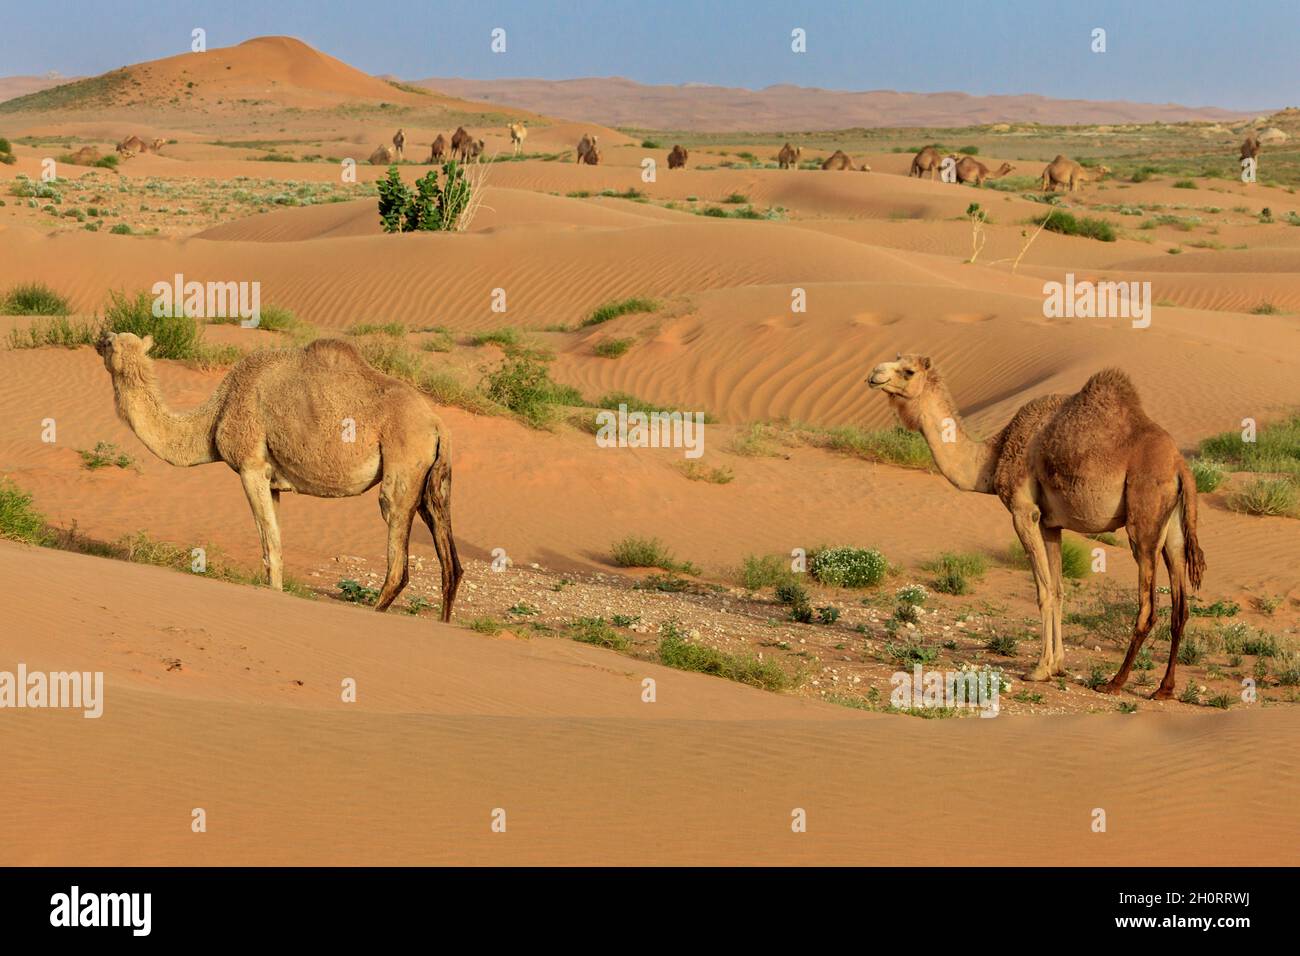 Two camels standing in the desert, Saudi Arabia Stock Photo